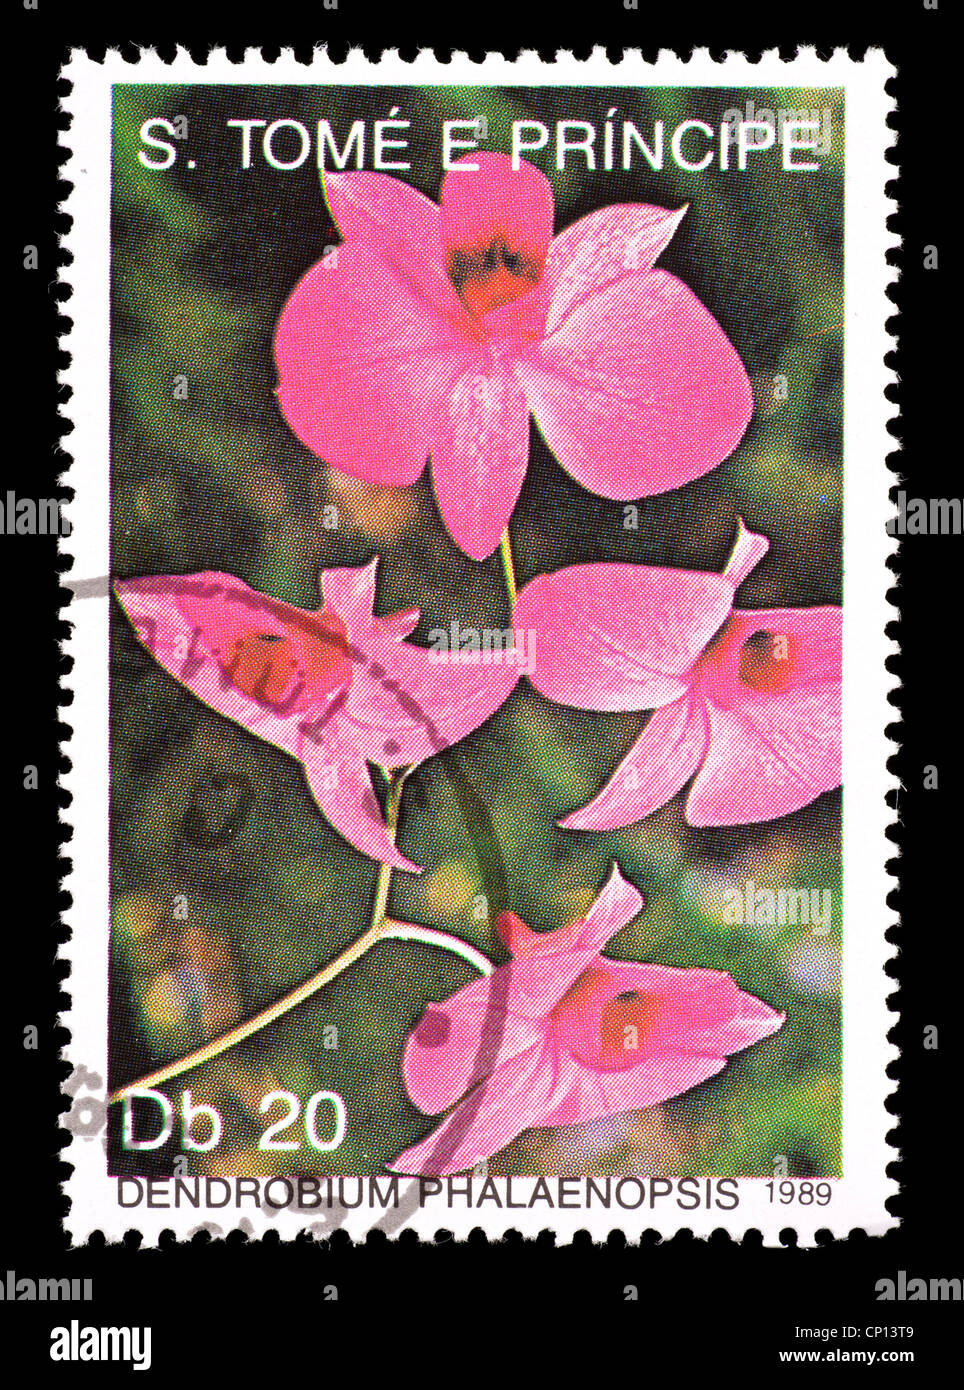 Postage stamp from Saint Thomas and Prince Islands depicting a pink orchid (Dendrobium phalaenopsis) Stock Photo